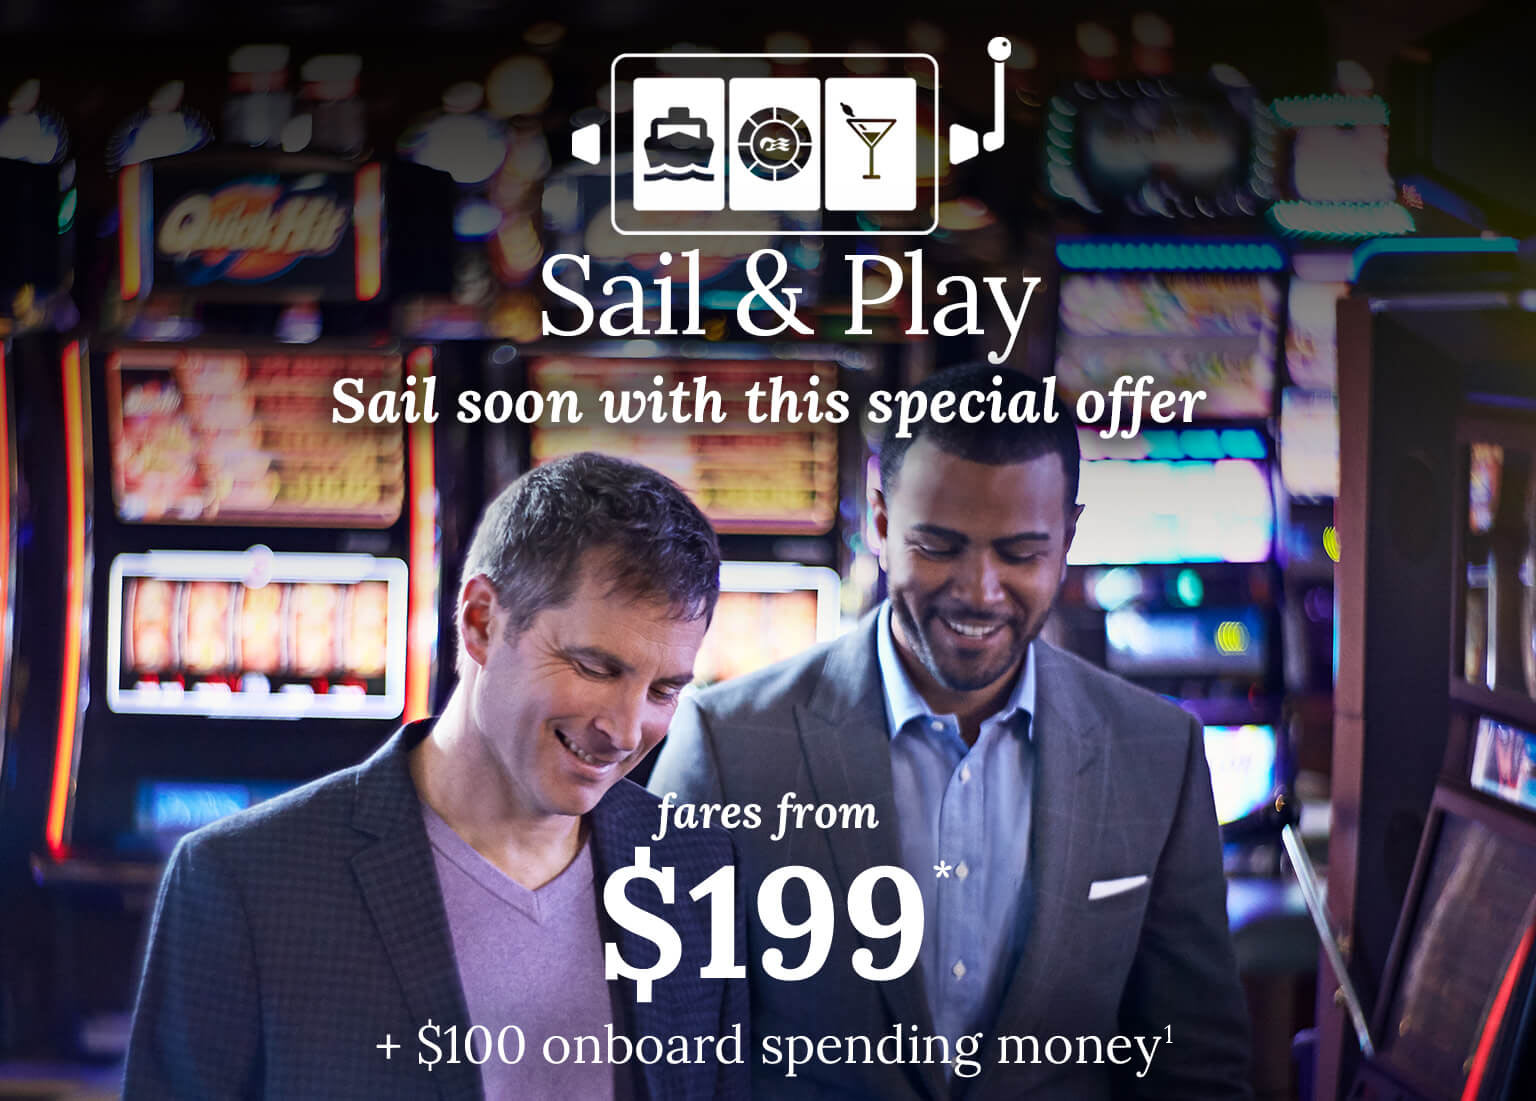 Fares from $199 + $100 onboard spending money. Click here to book.